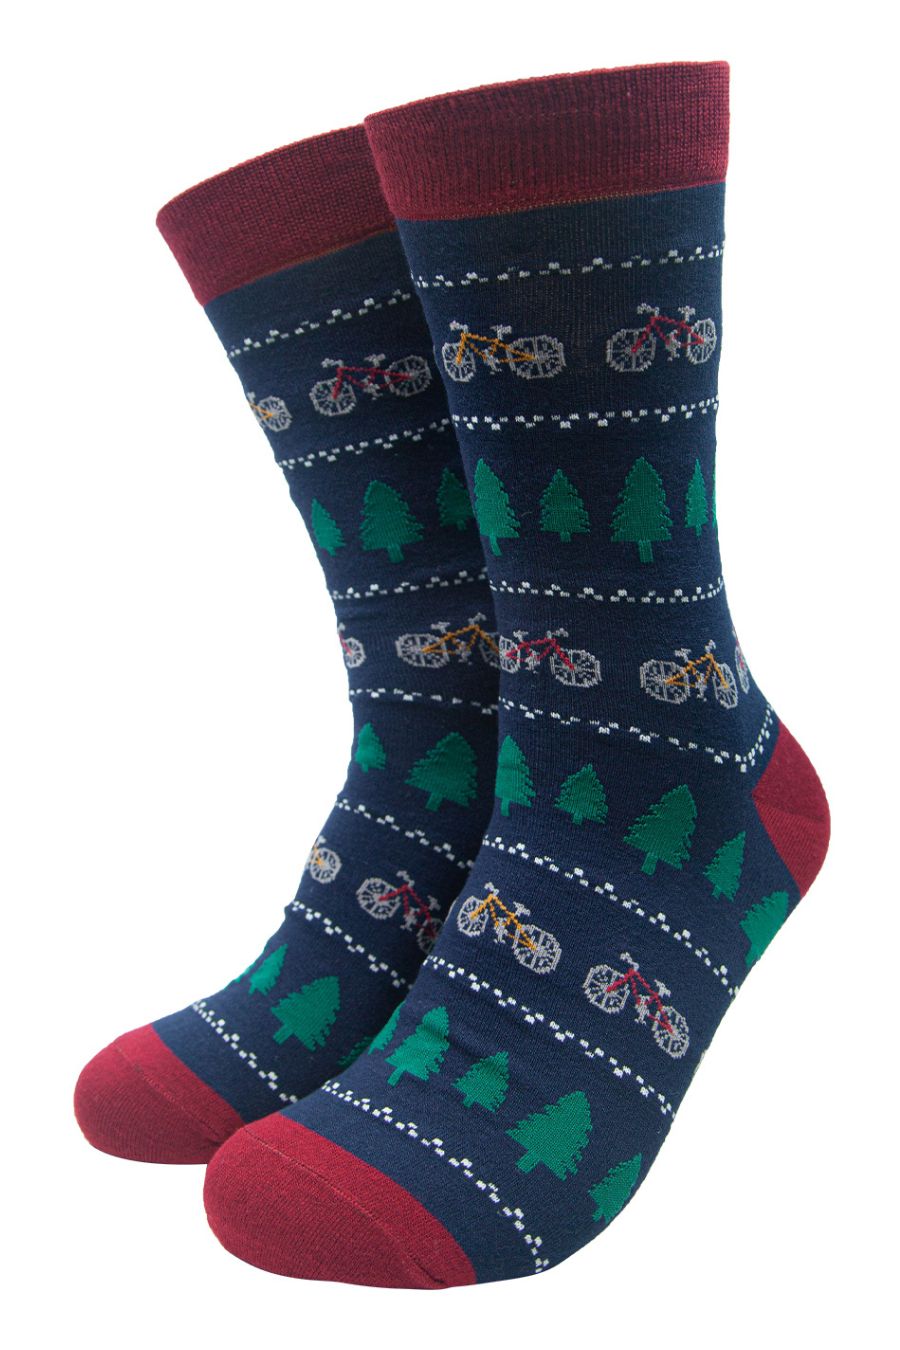 blue and burgundy dress socks with an all over bicycle and tree print